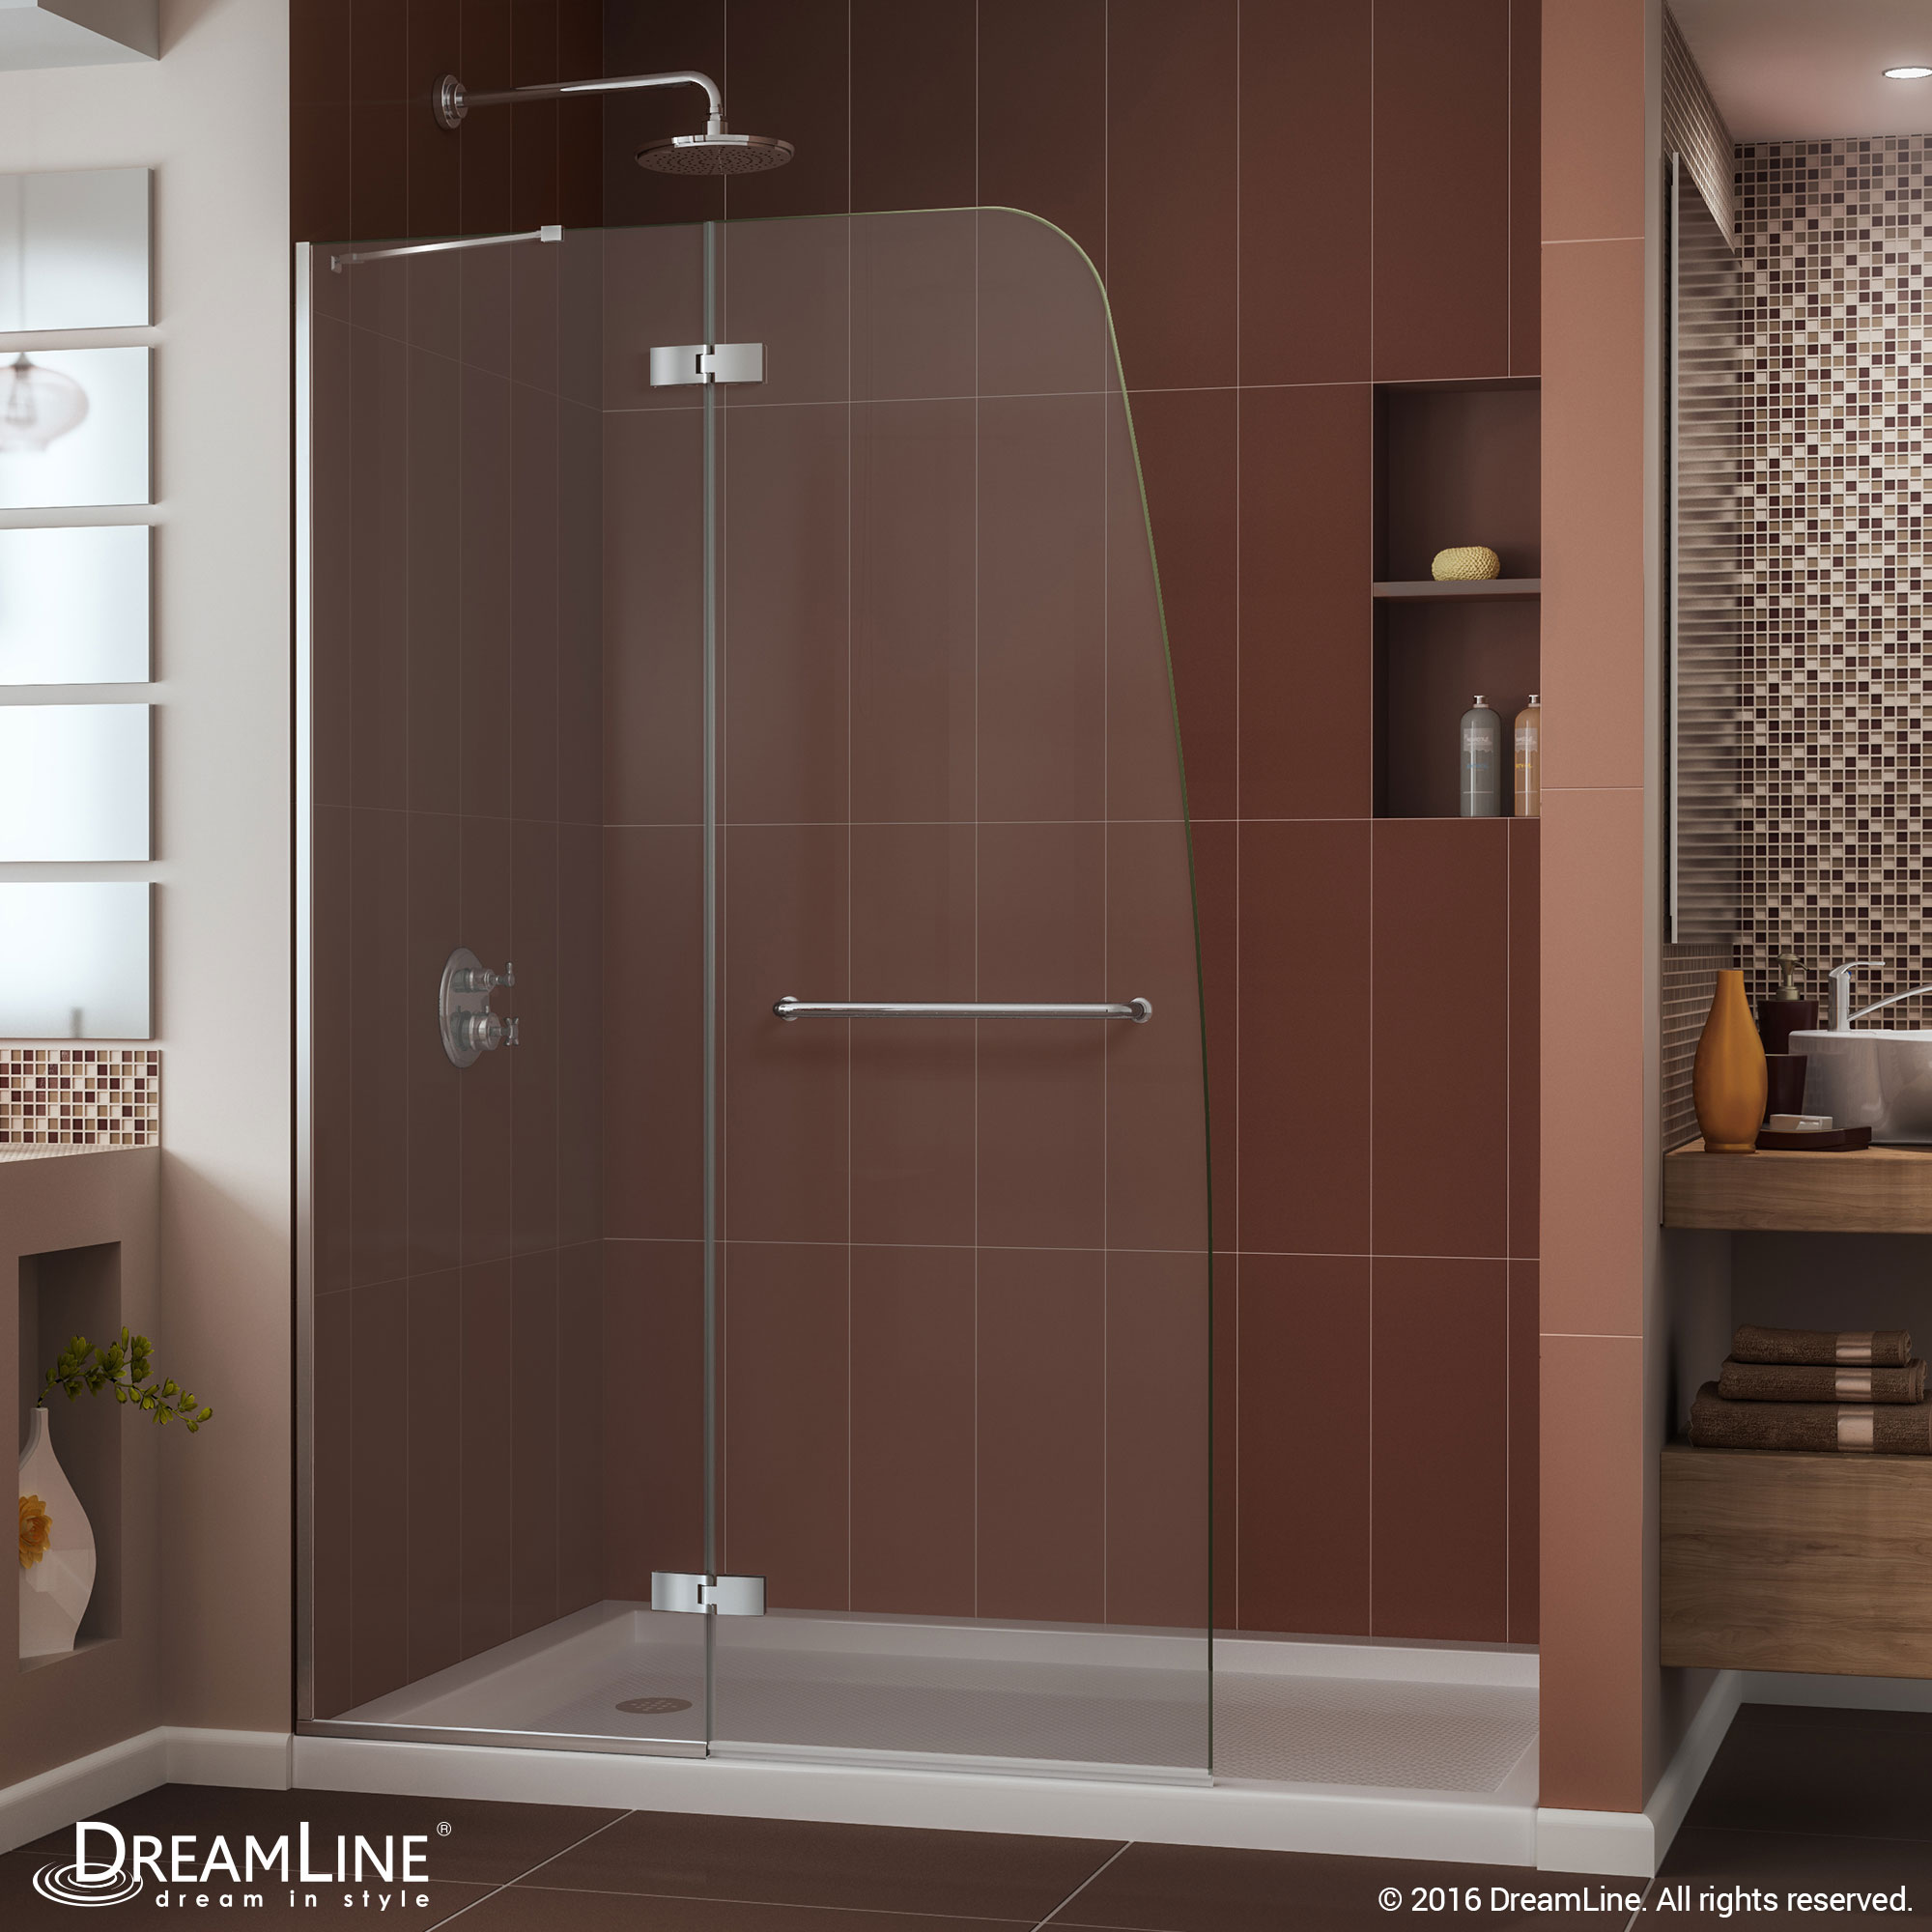 DreamLine Aqua Ultra 30 in. D x 60 in. W x 74 3/4 in. H Frameless Shower Door in Brushed Nickel and Left Drain Biscuit Base Kit